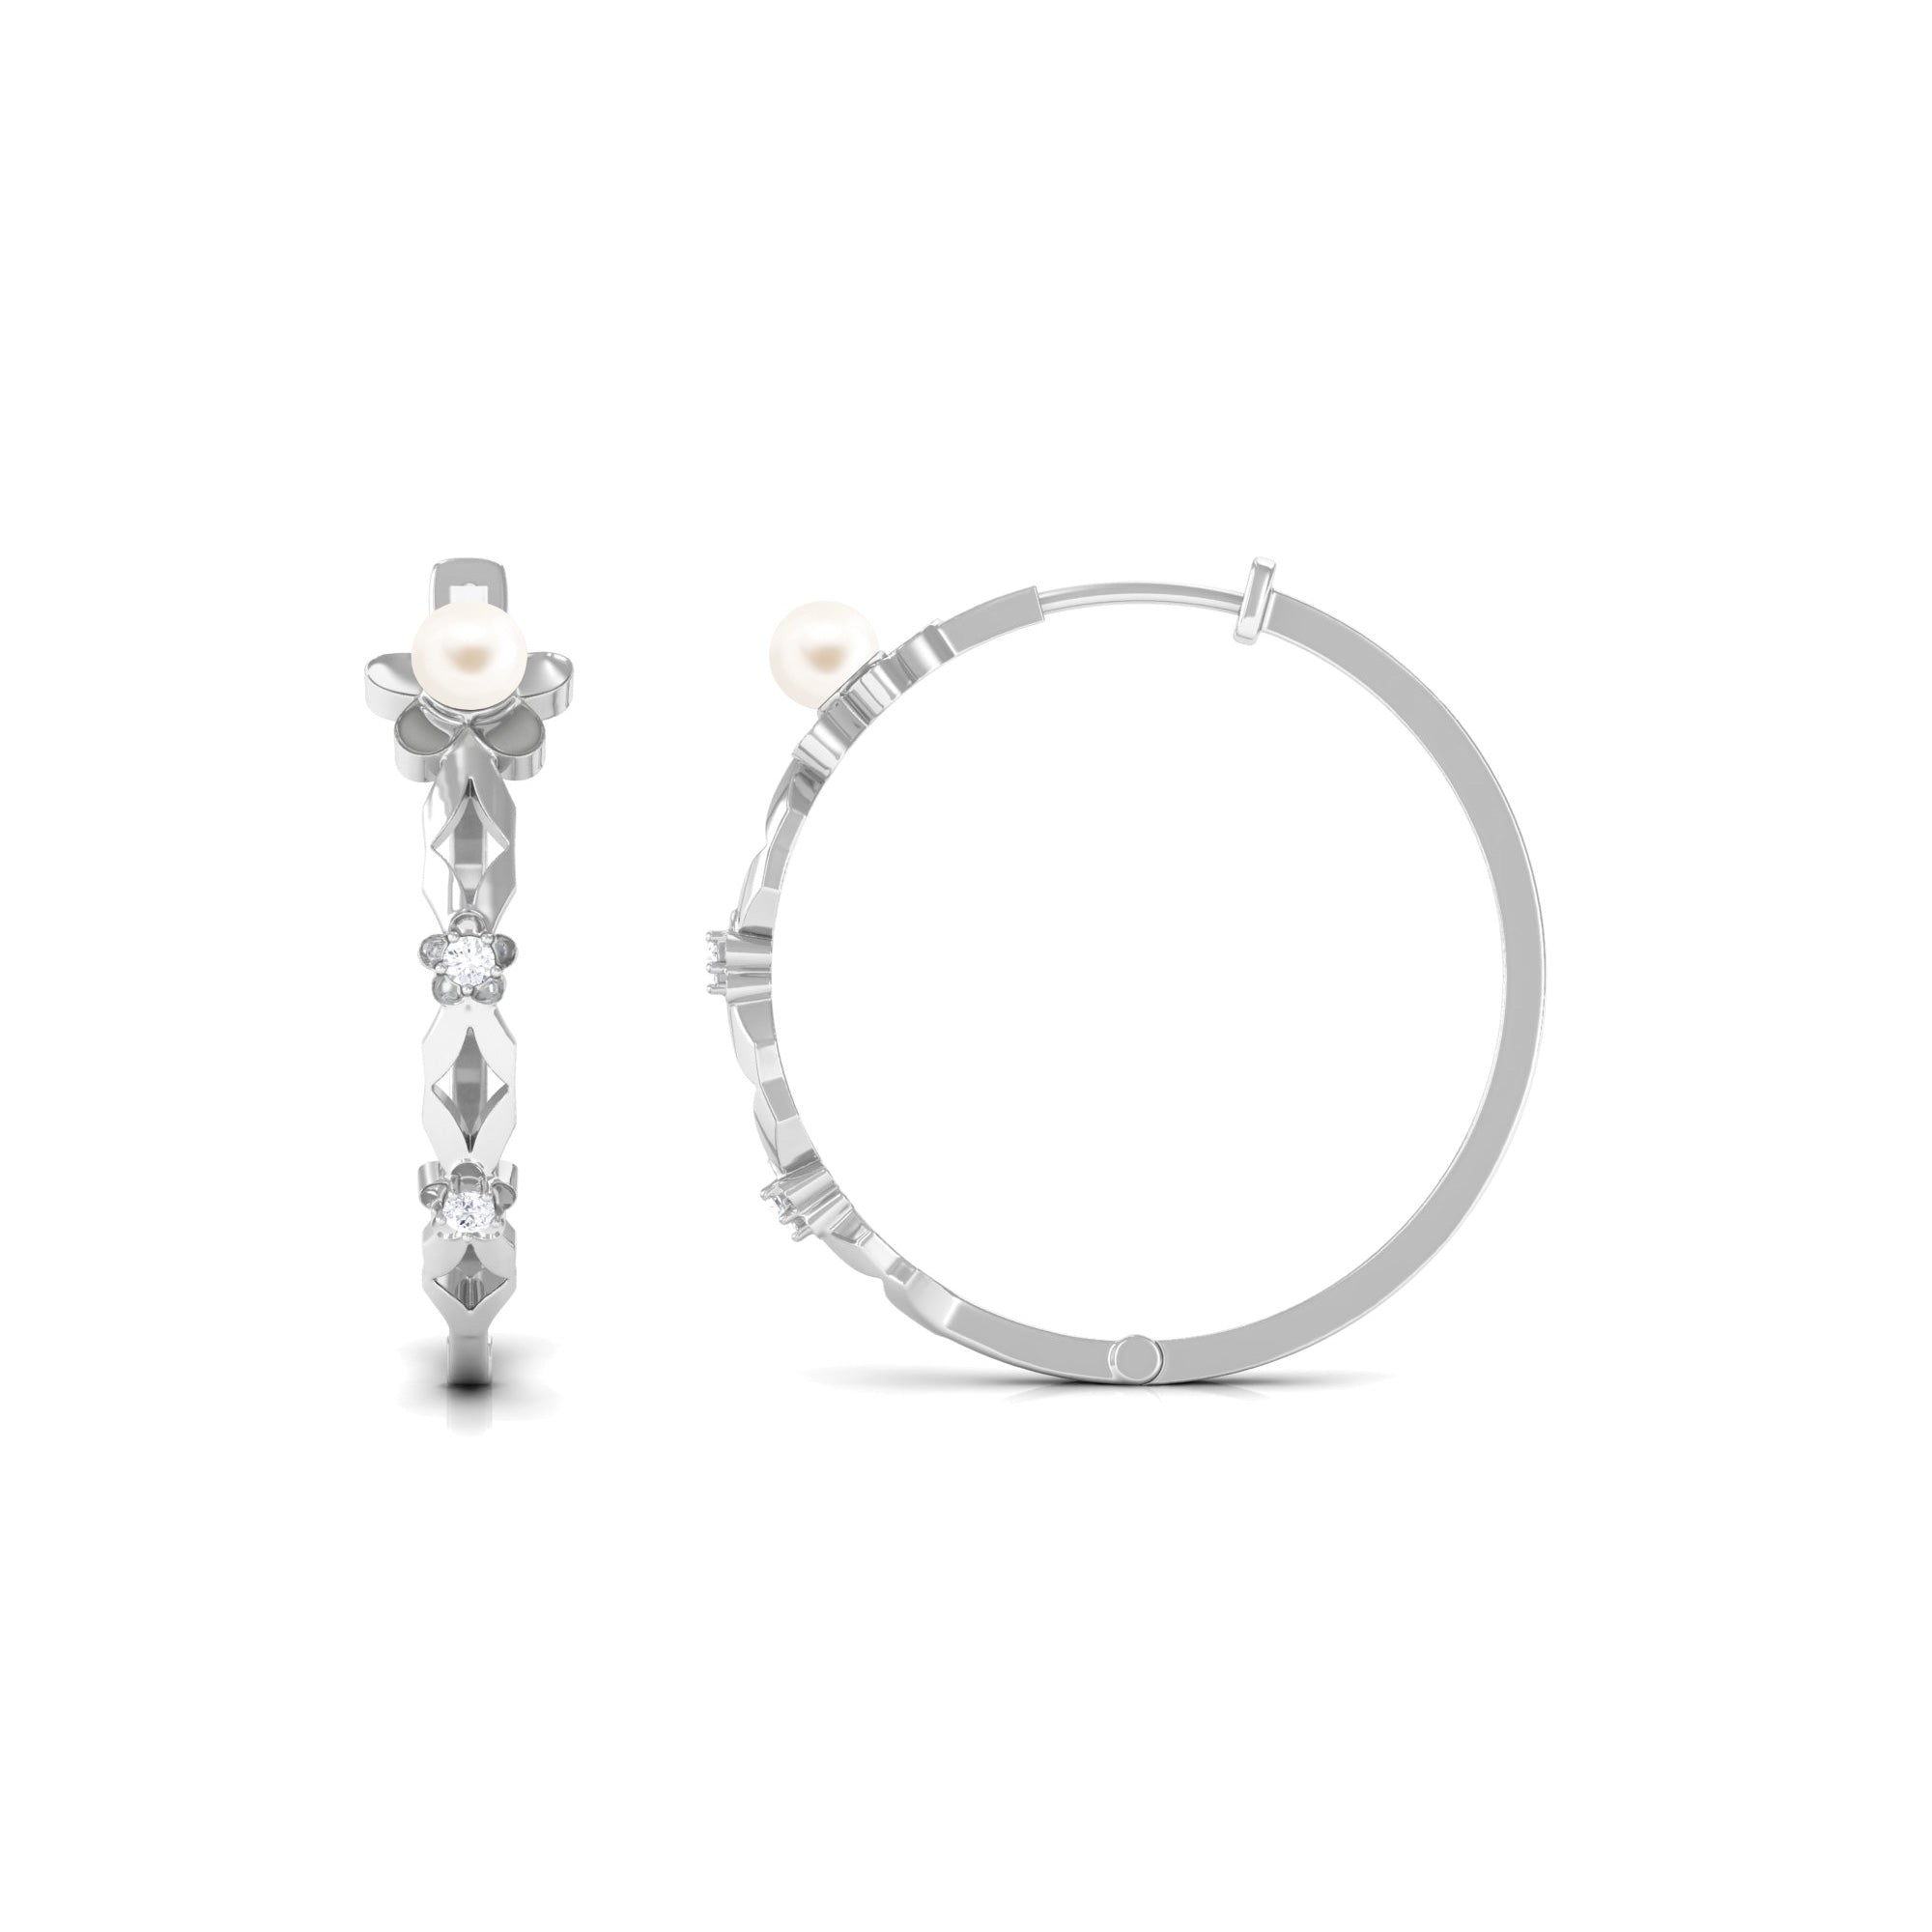 Nature Inspired White Pearl Floral Inspired Hoop Earrings with Diamond Freshwater Pearl-AAA Quality - Arisha Jewels